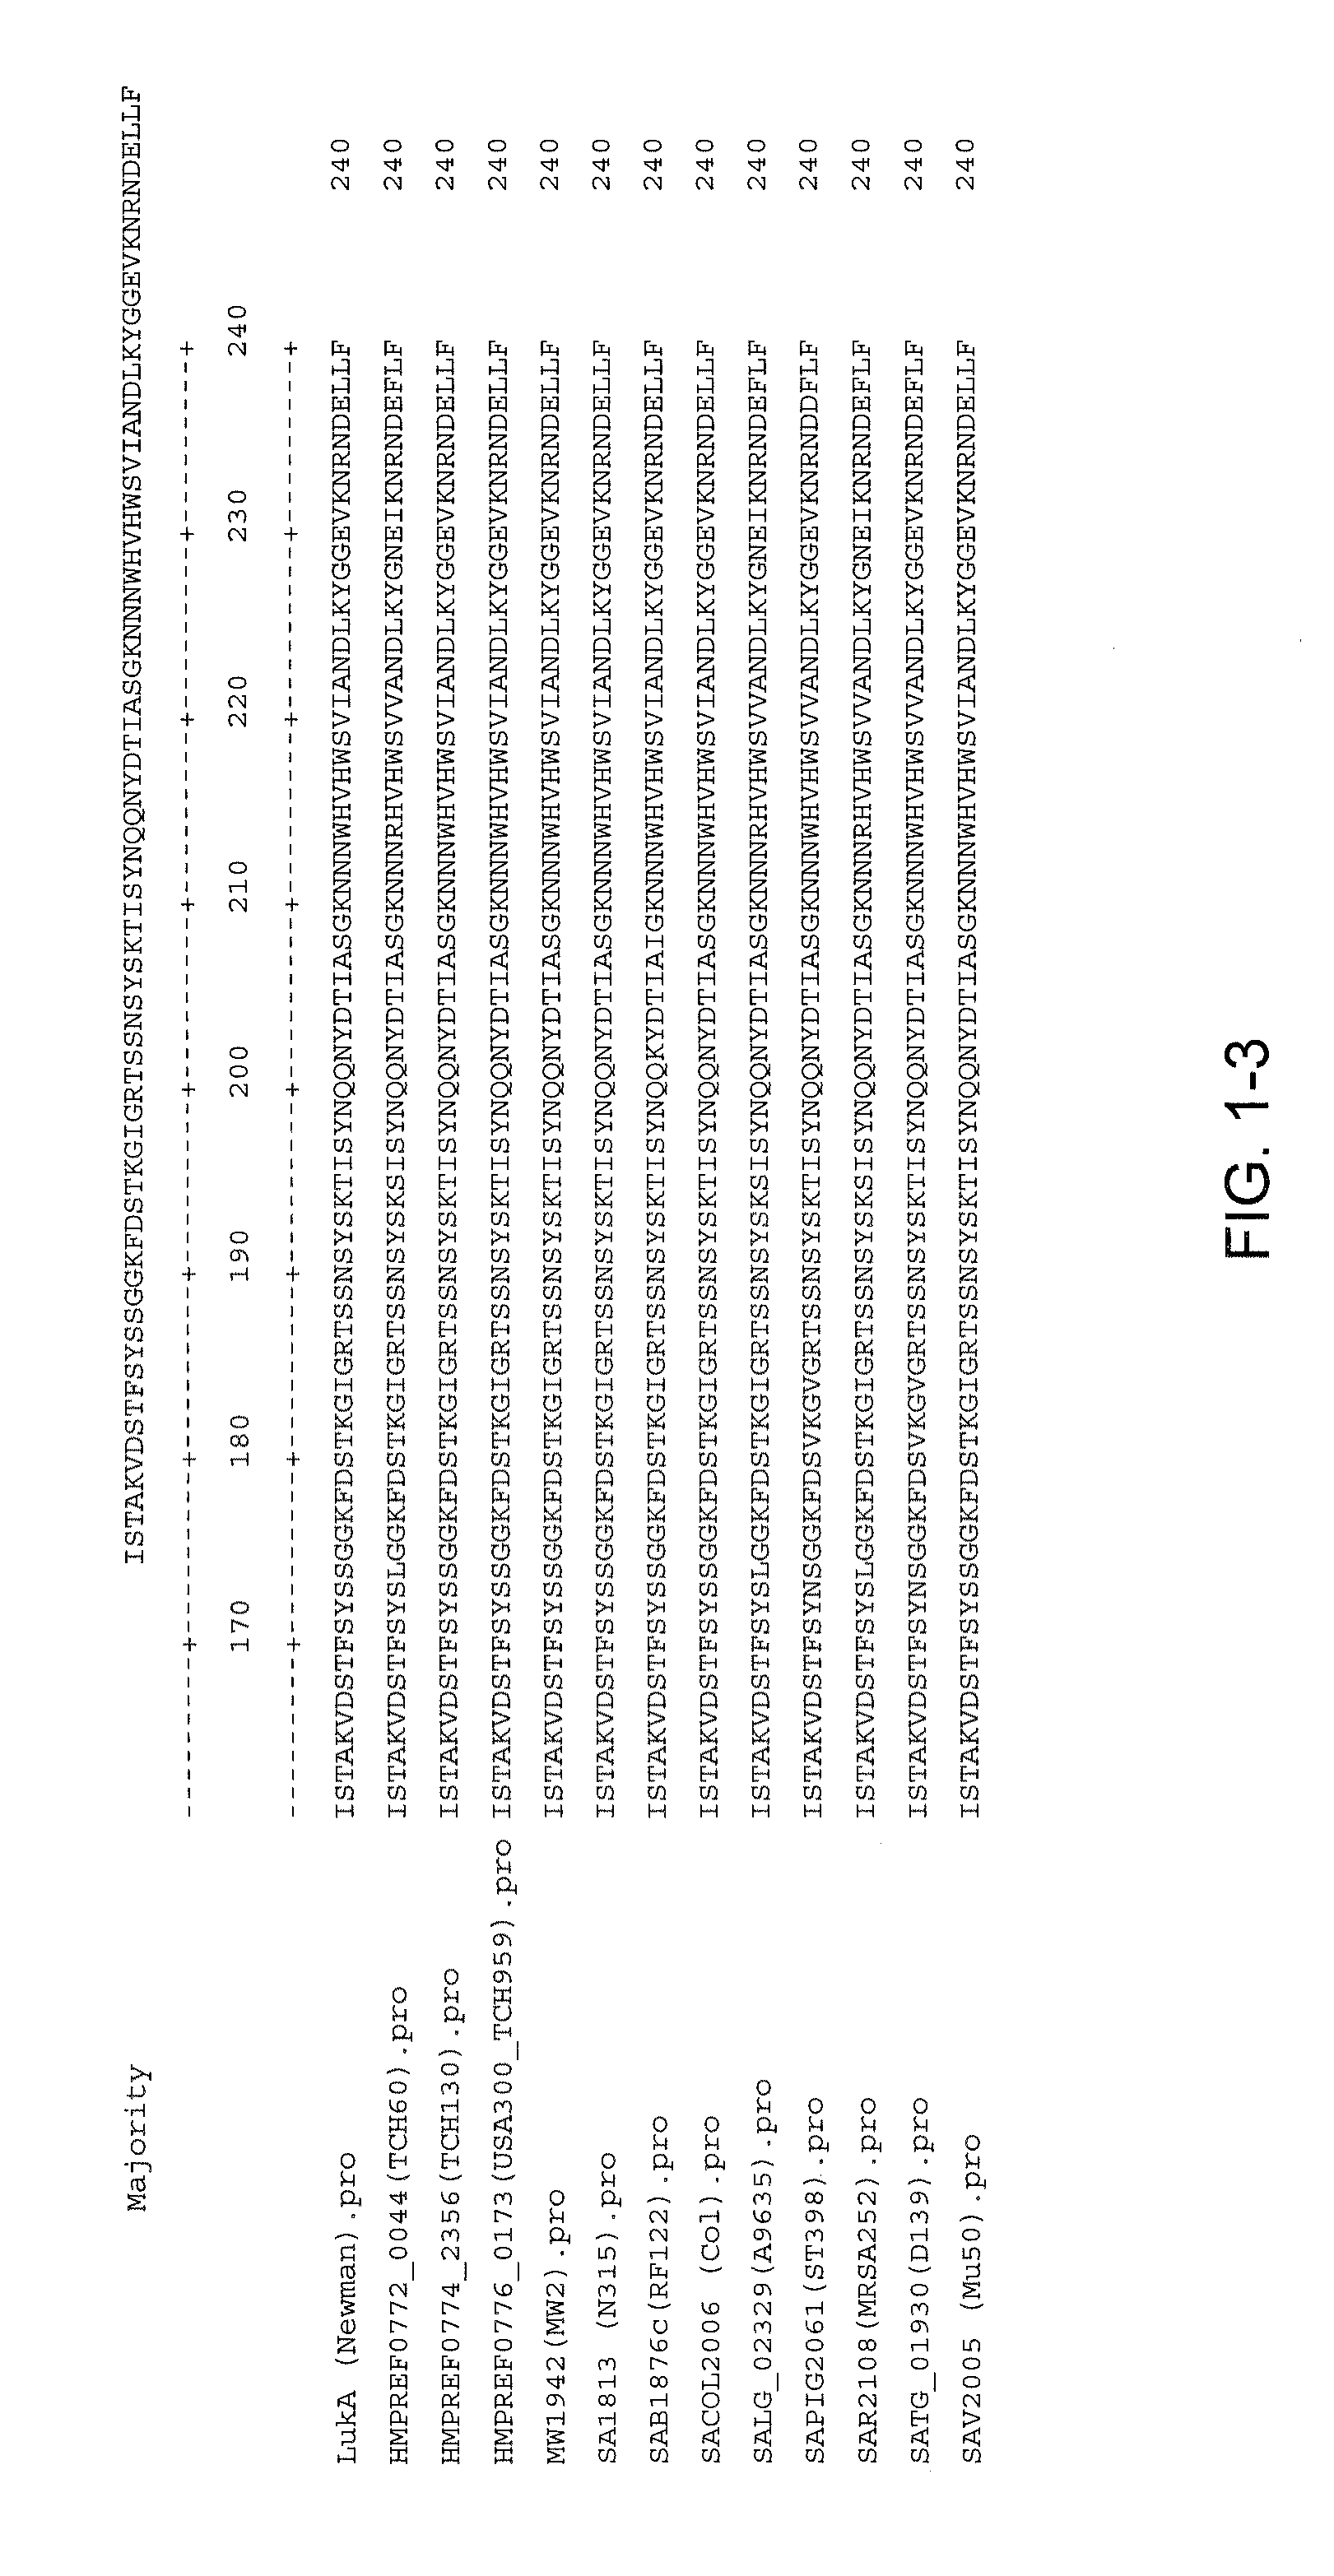 Staphylococcus aureus leukocidins, therapeutic compositions, and uses thereof